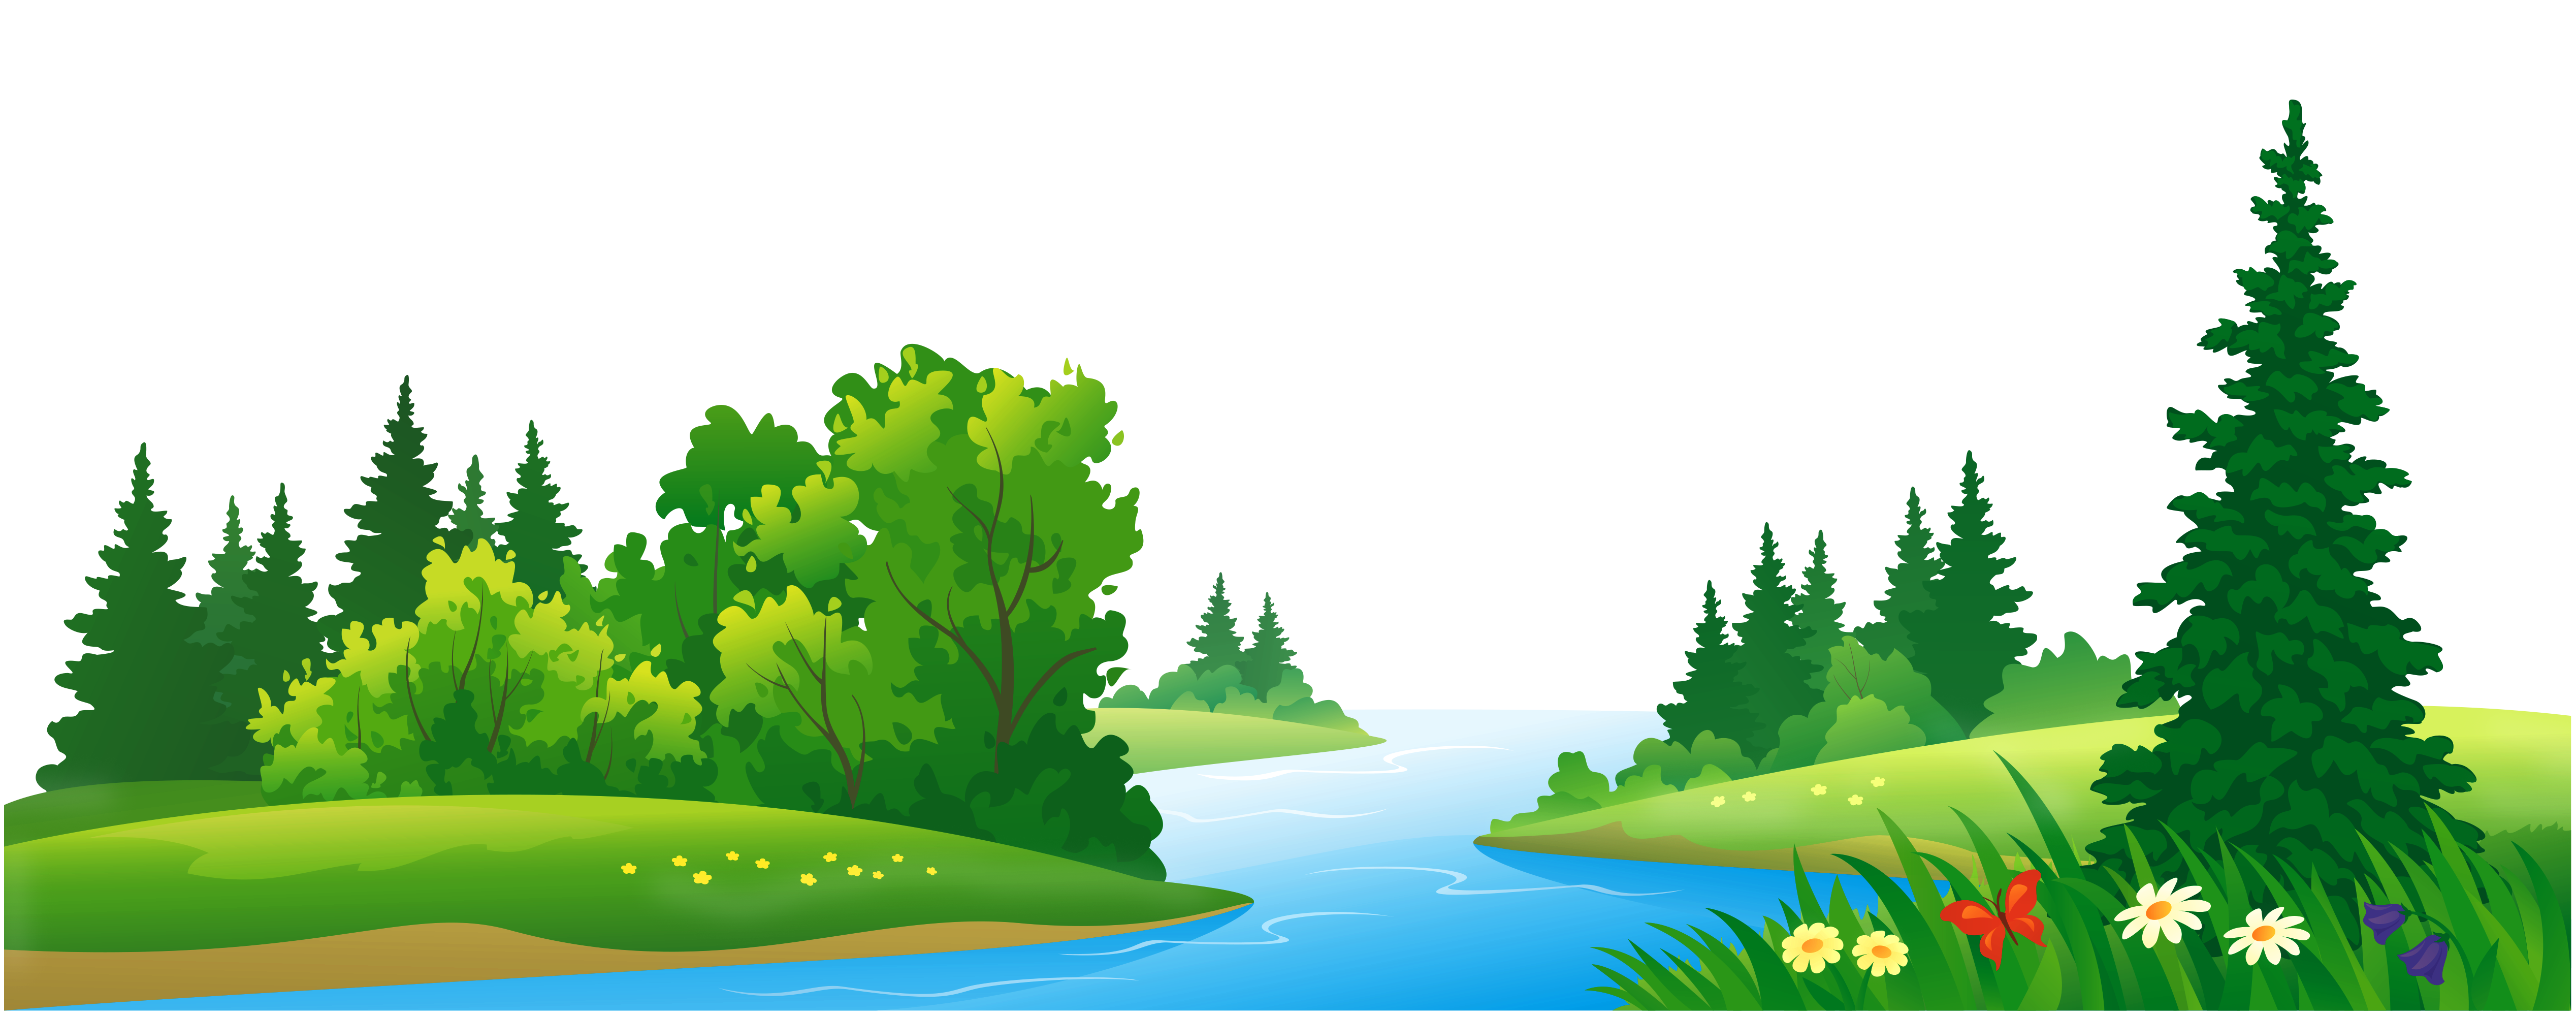 forest clipart - Forest Clip Art